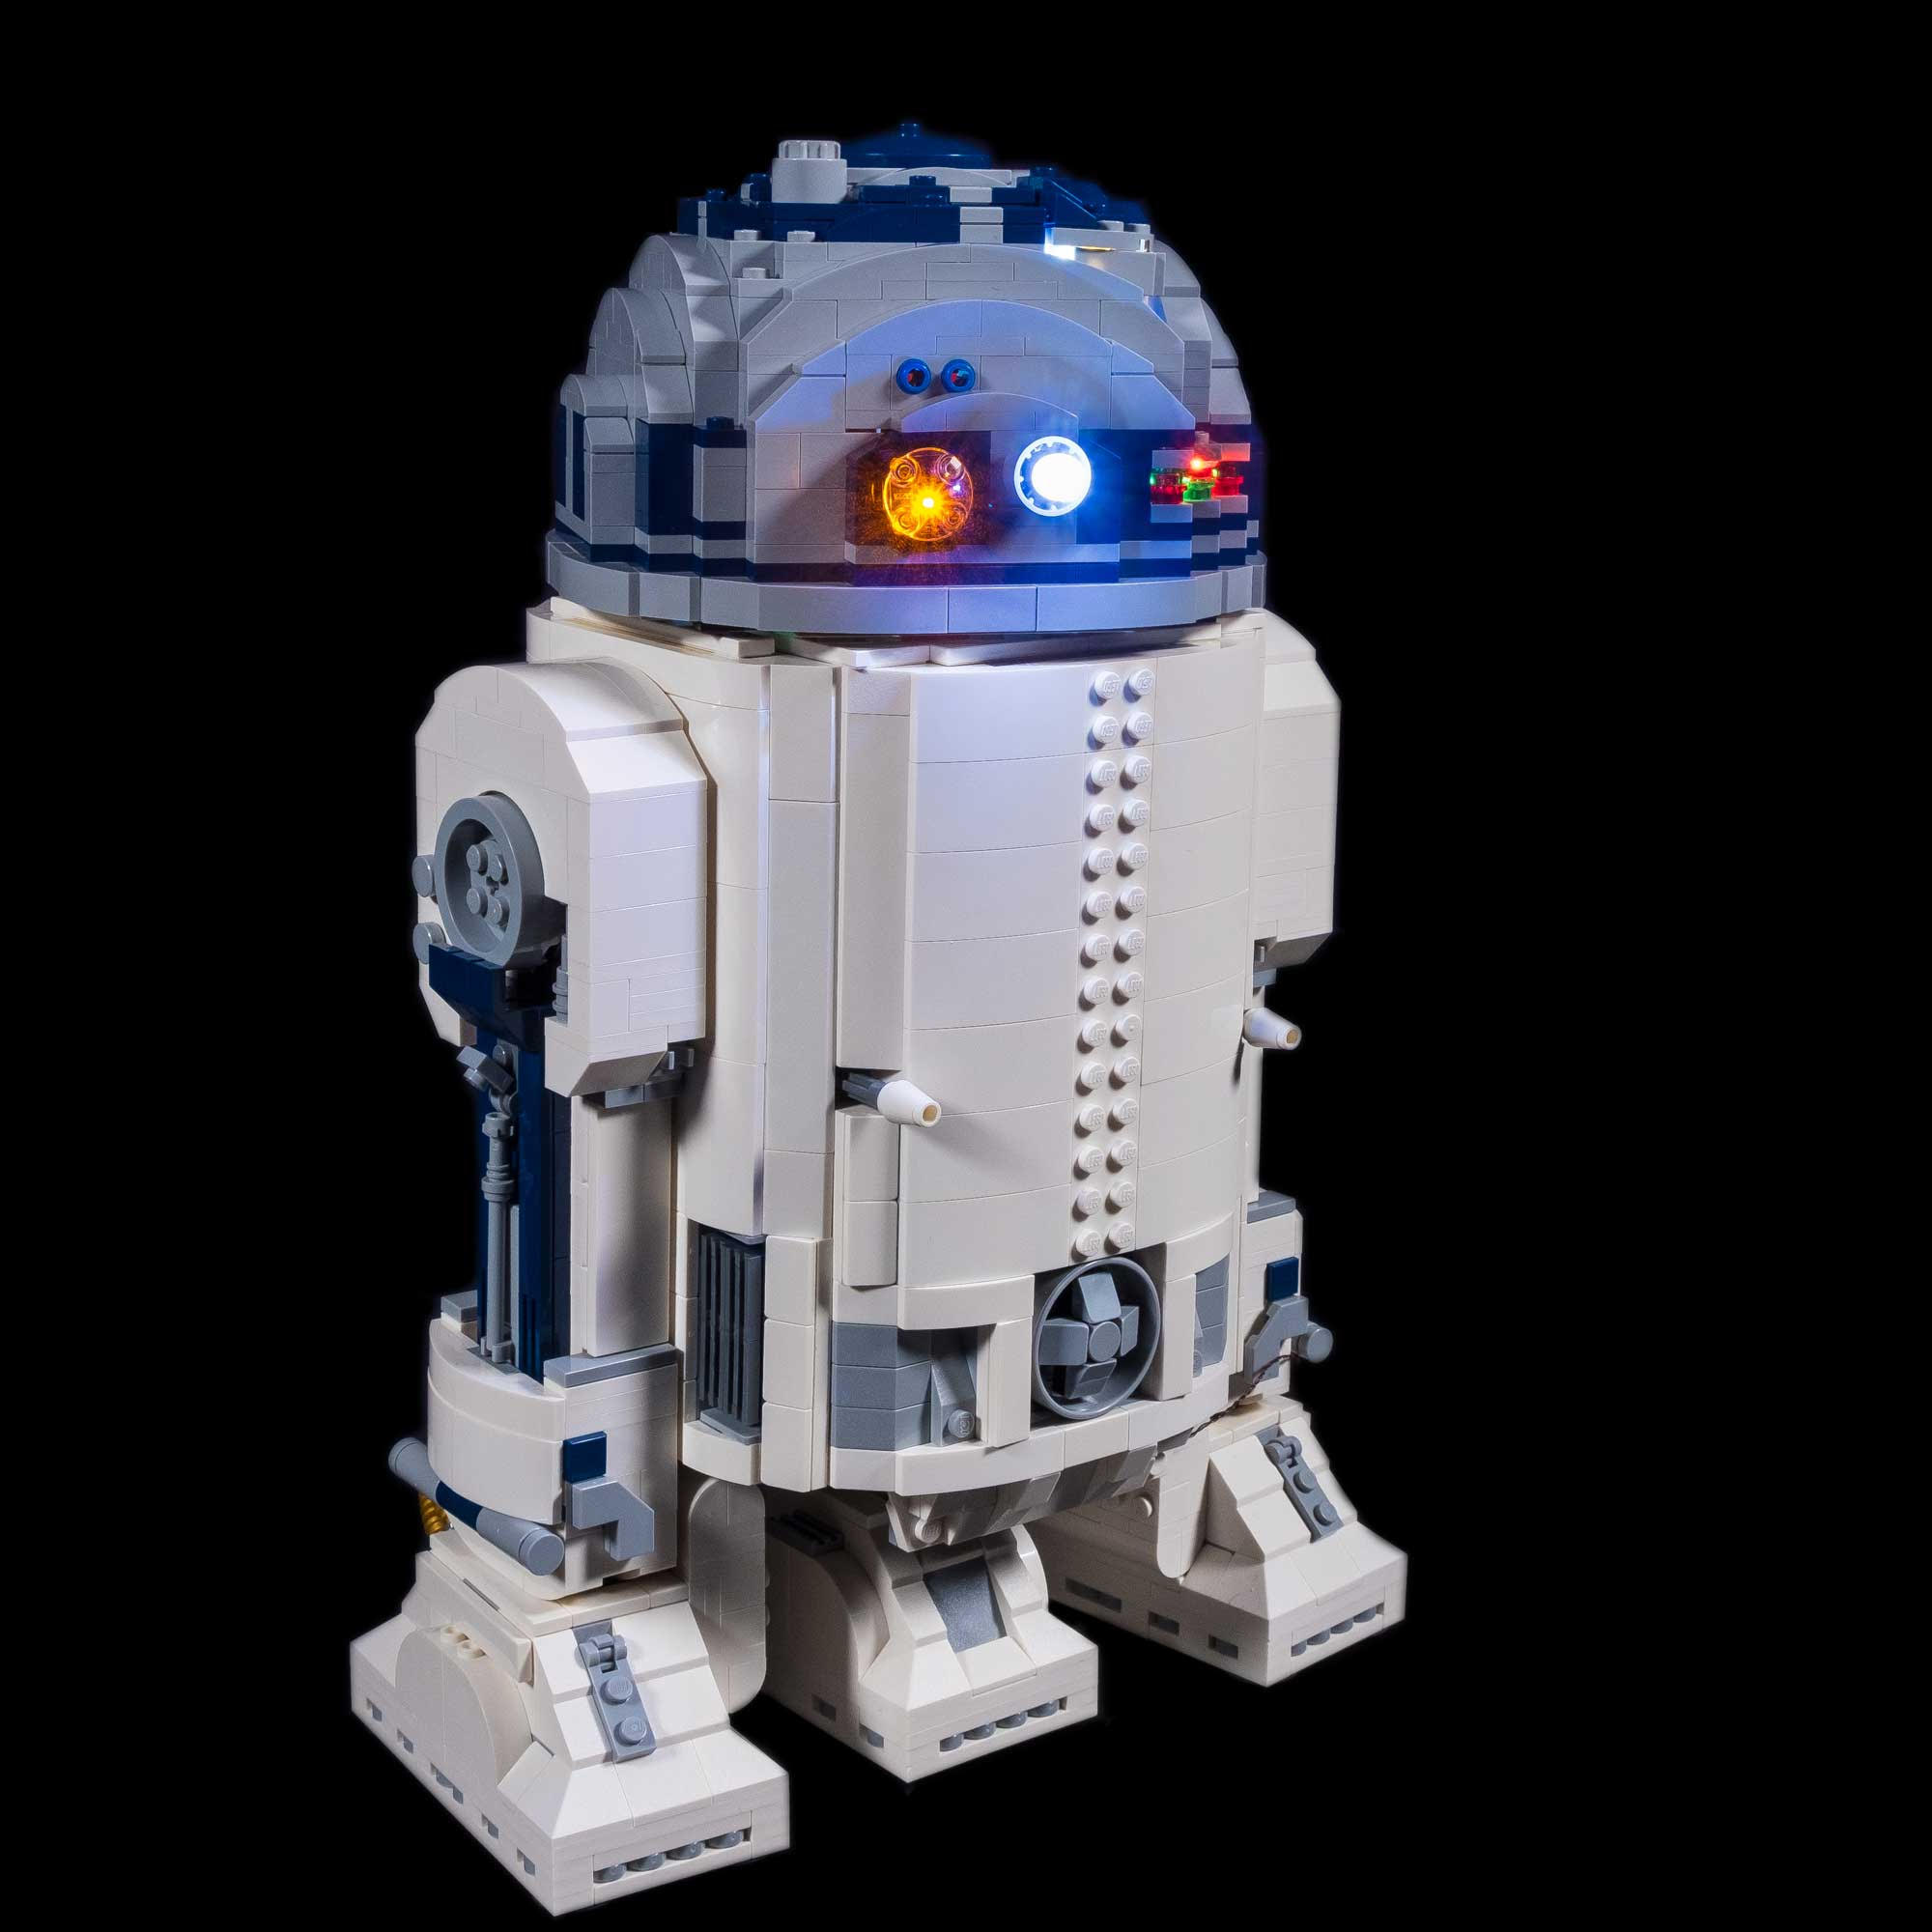 RC Sound Version Not Include The Lego Set Kyglaring Led Lighting Kit for Star Wars Light Sets Compatible with Lego 75308 Building Set R2-D2 